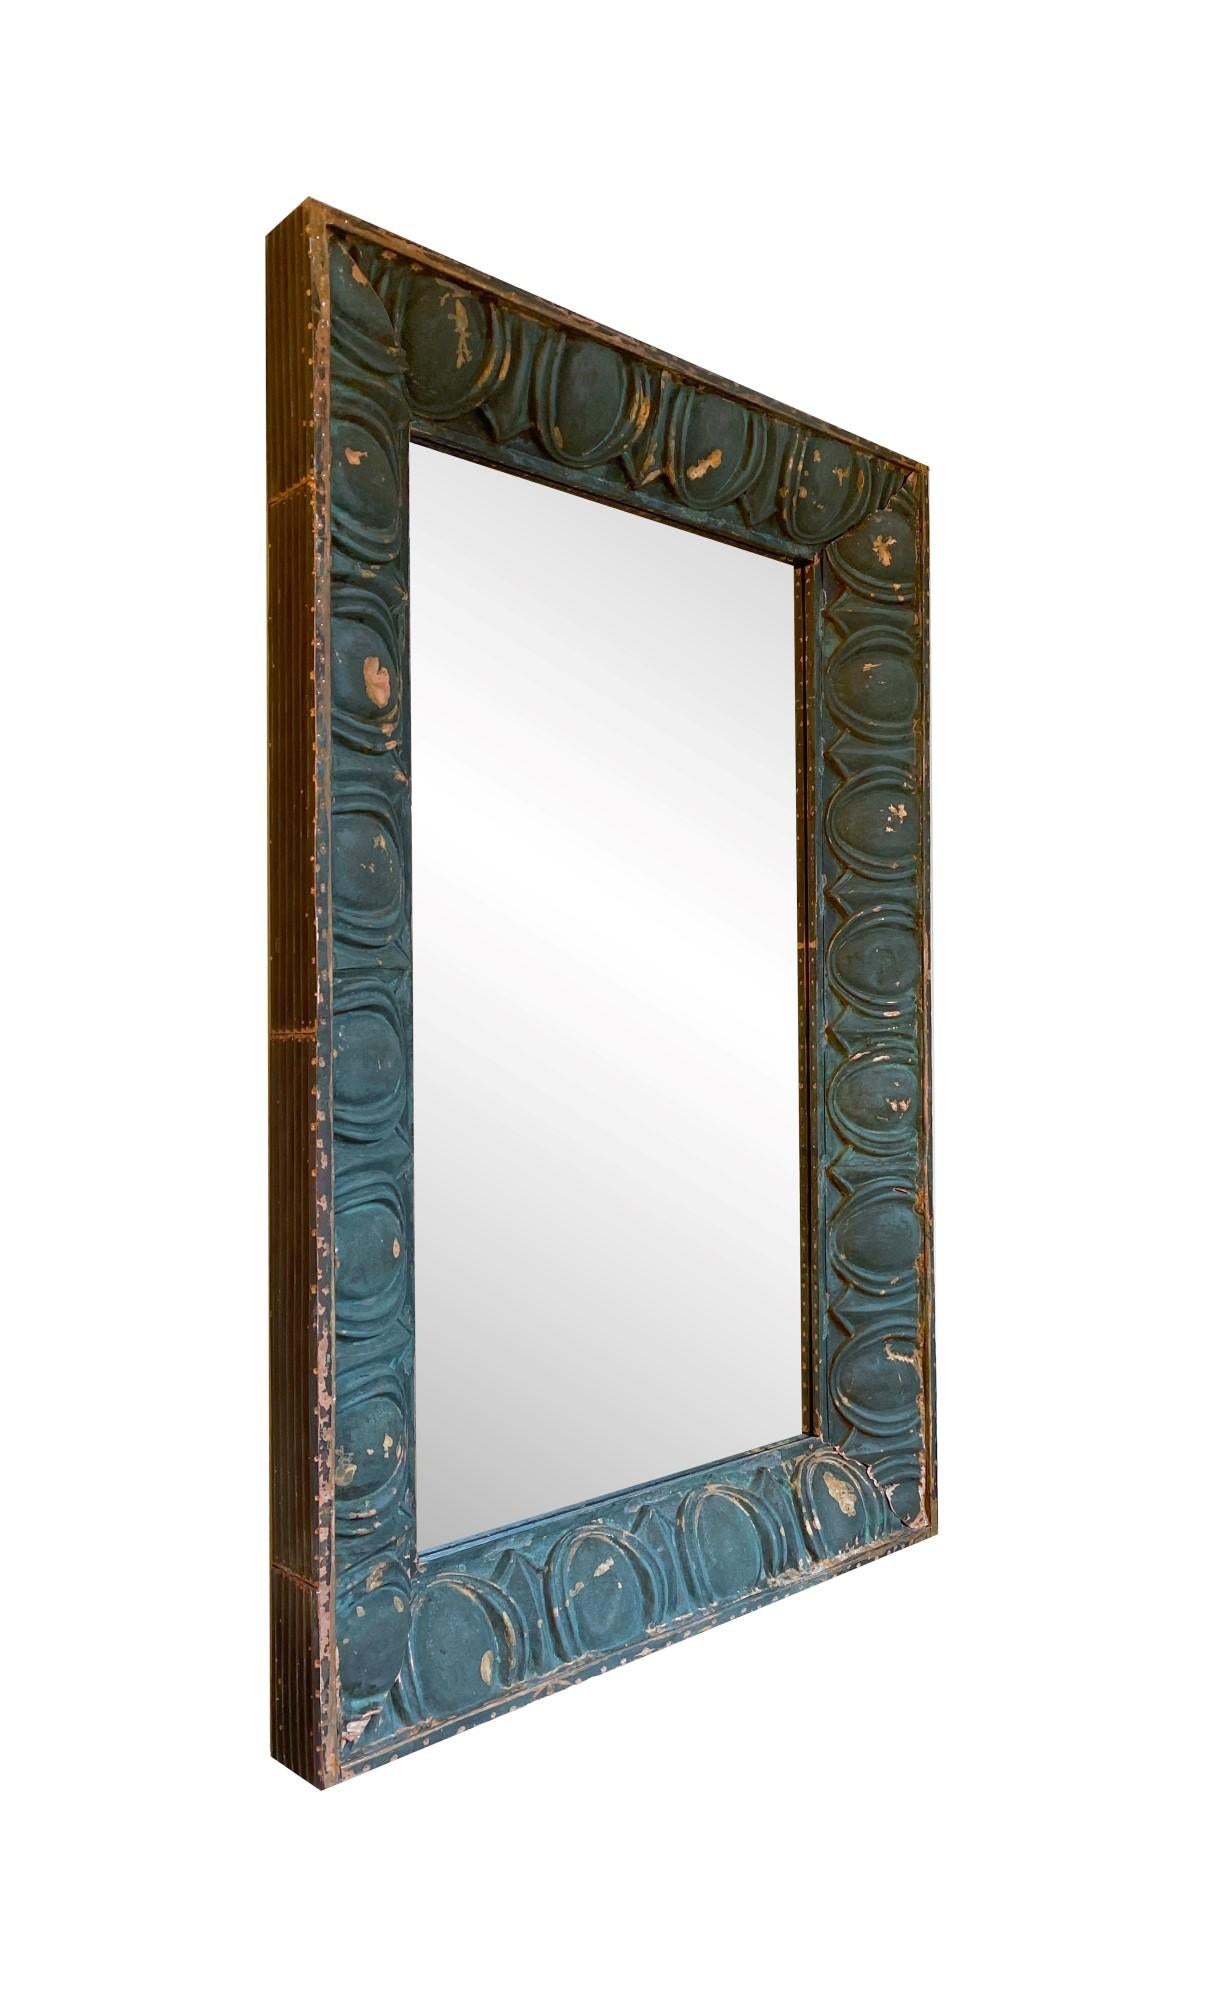 Contemporary 3D Mirror Made from Egg & Dart Copper Building Facade Turn of the Century